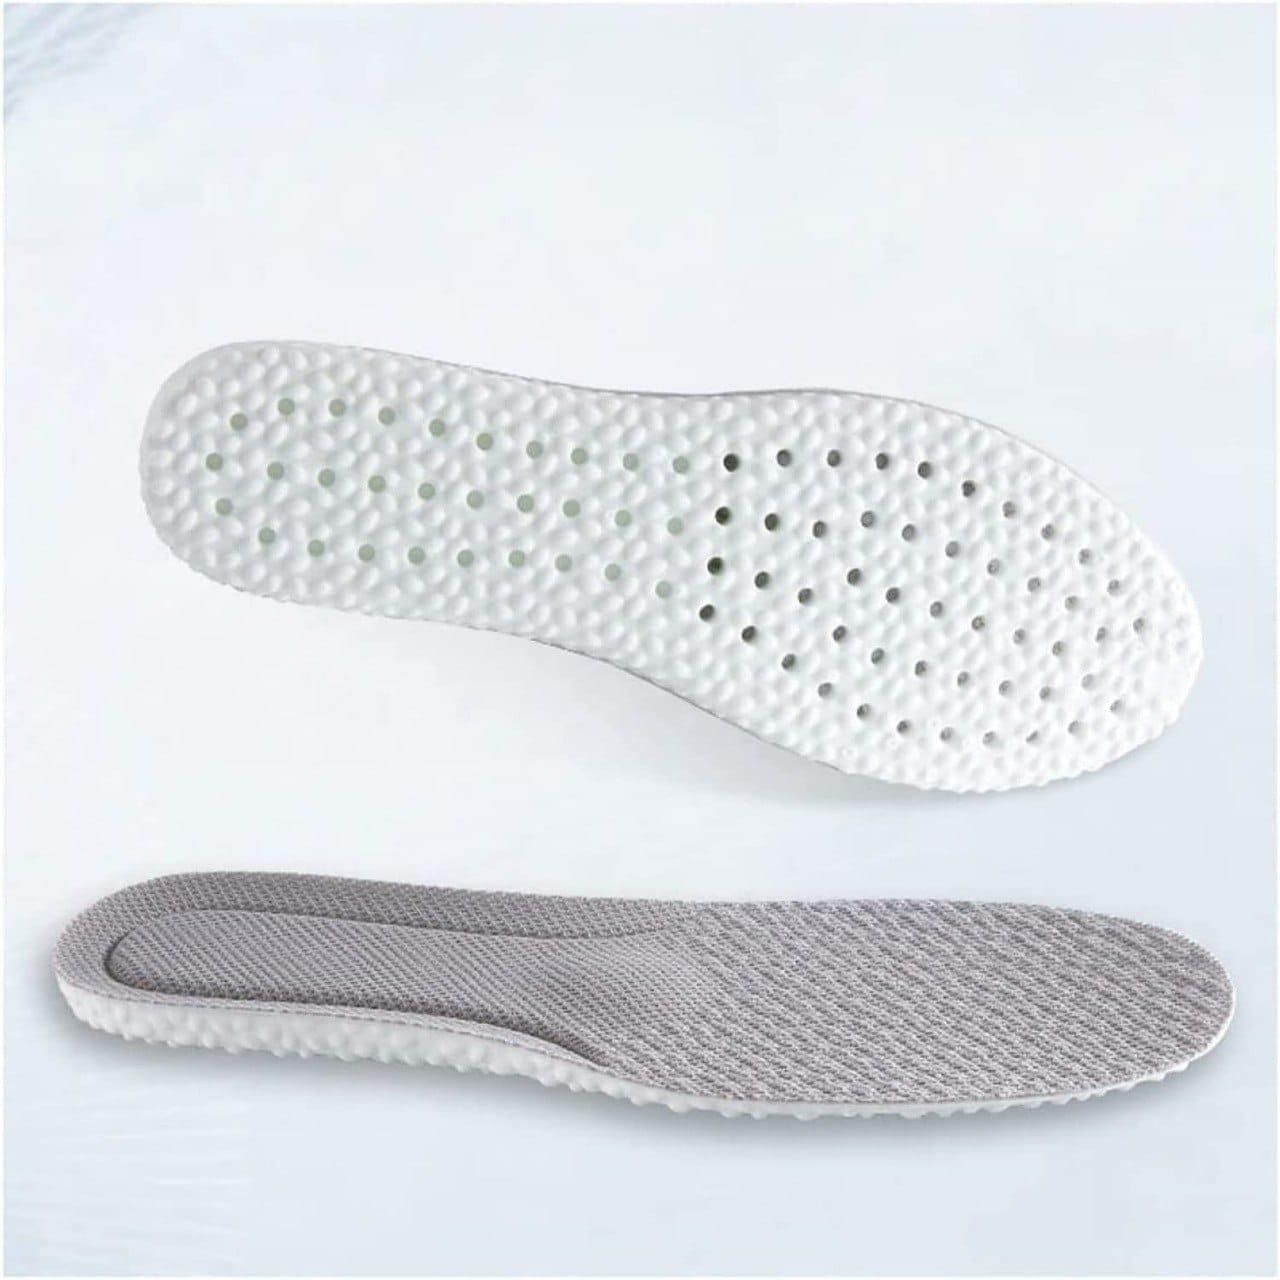 Insoles for Men and Women, Unisex Comfortable Athletic Insoles Pair